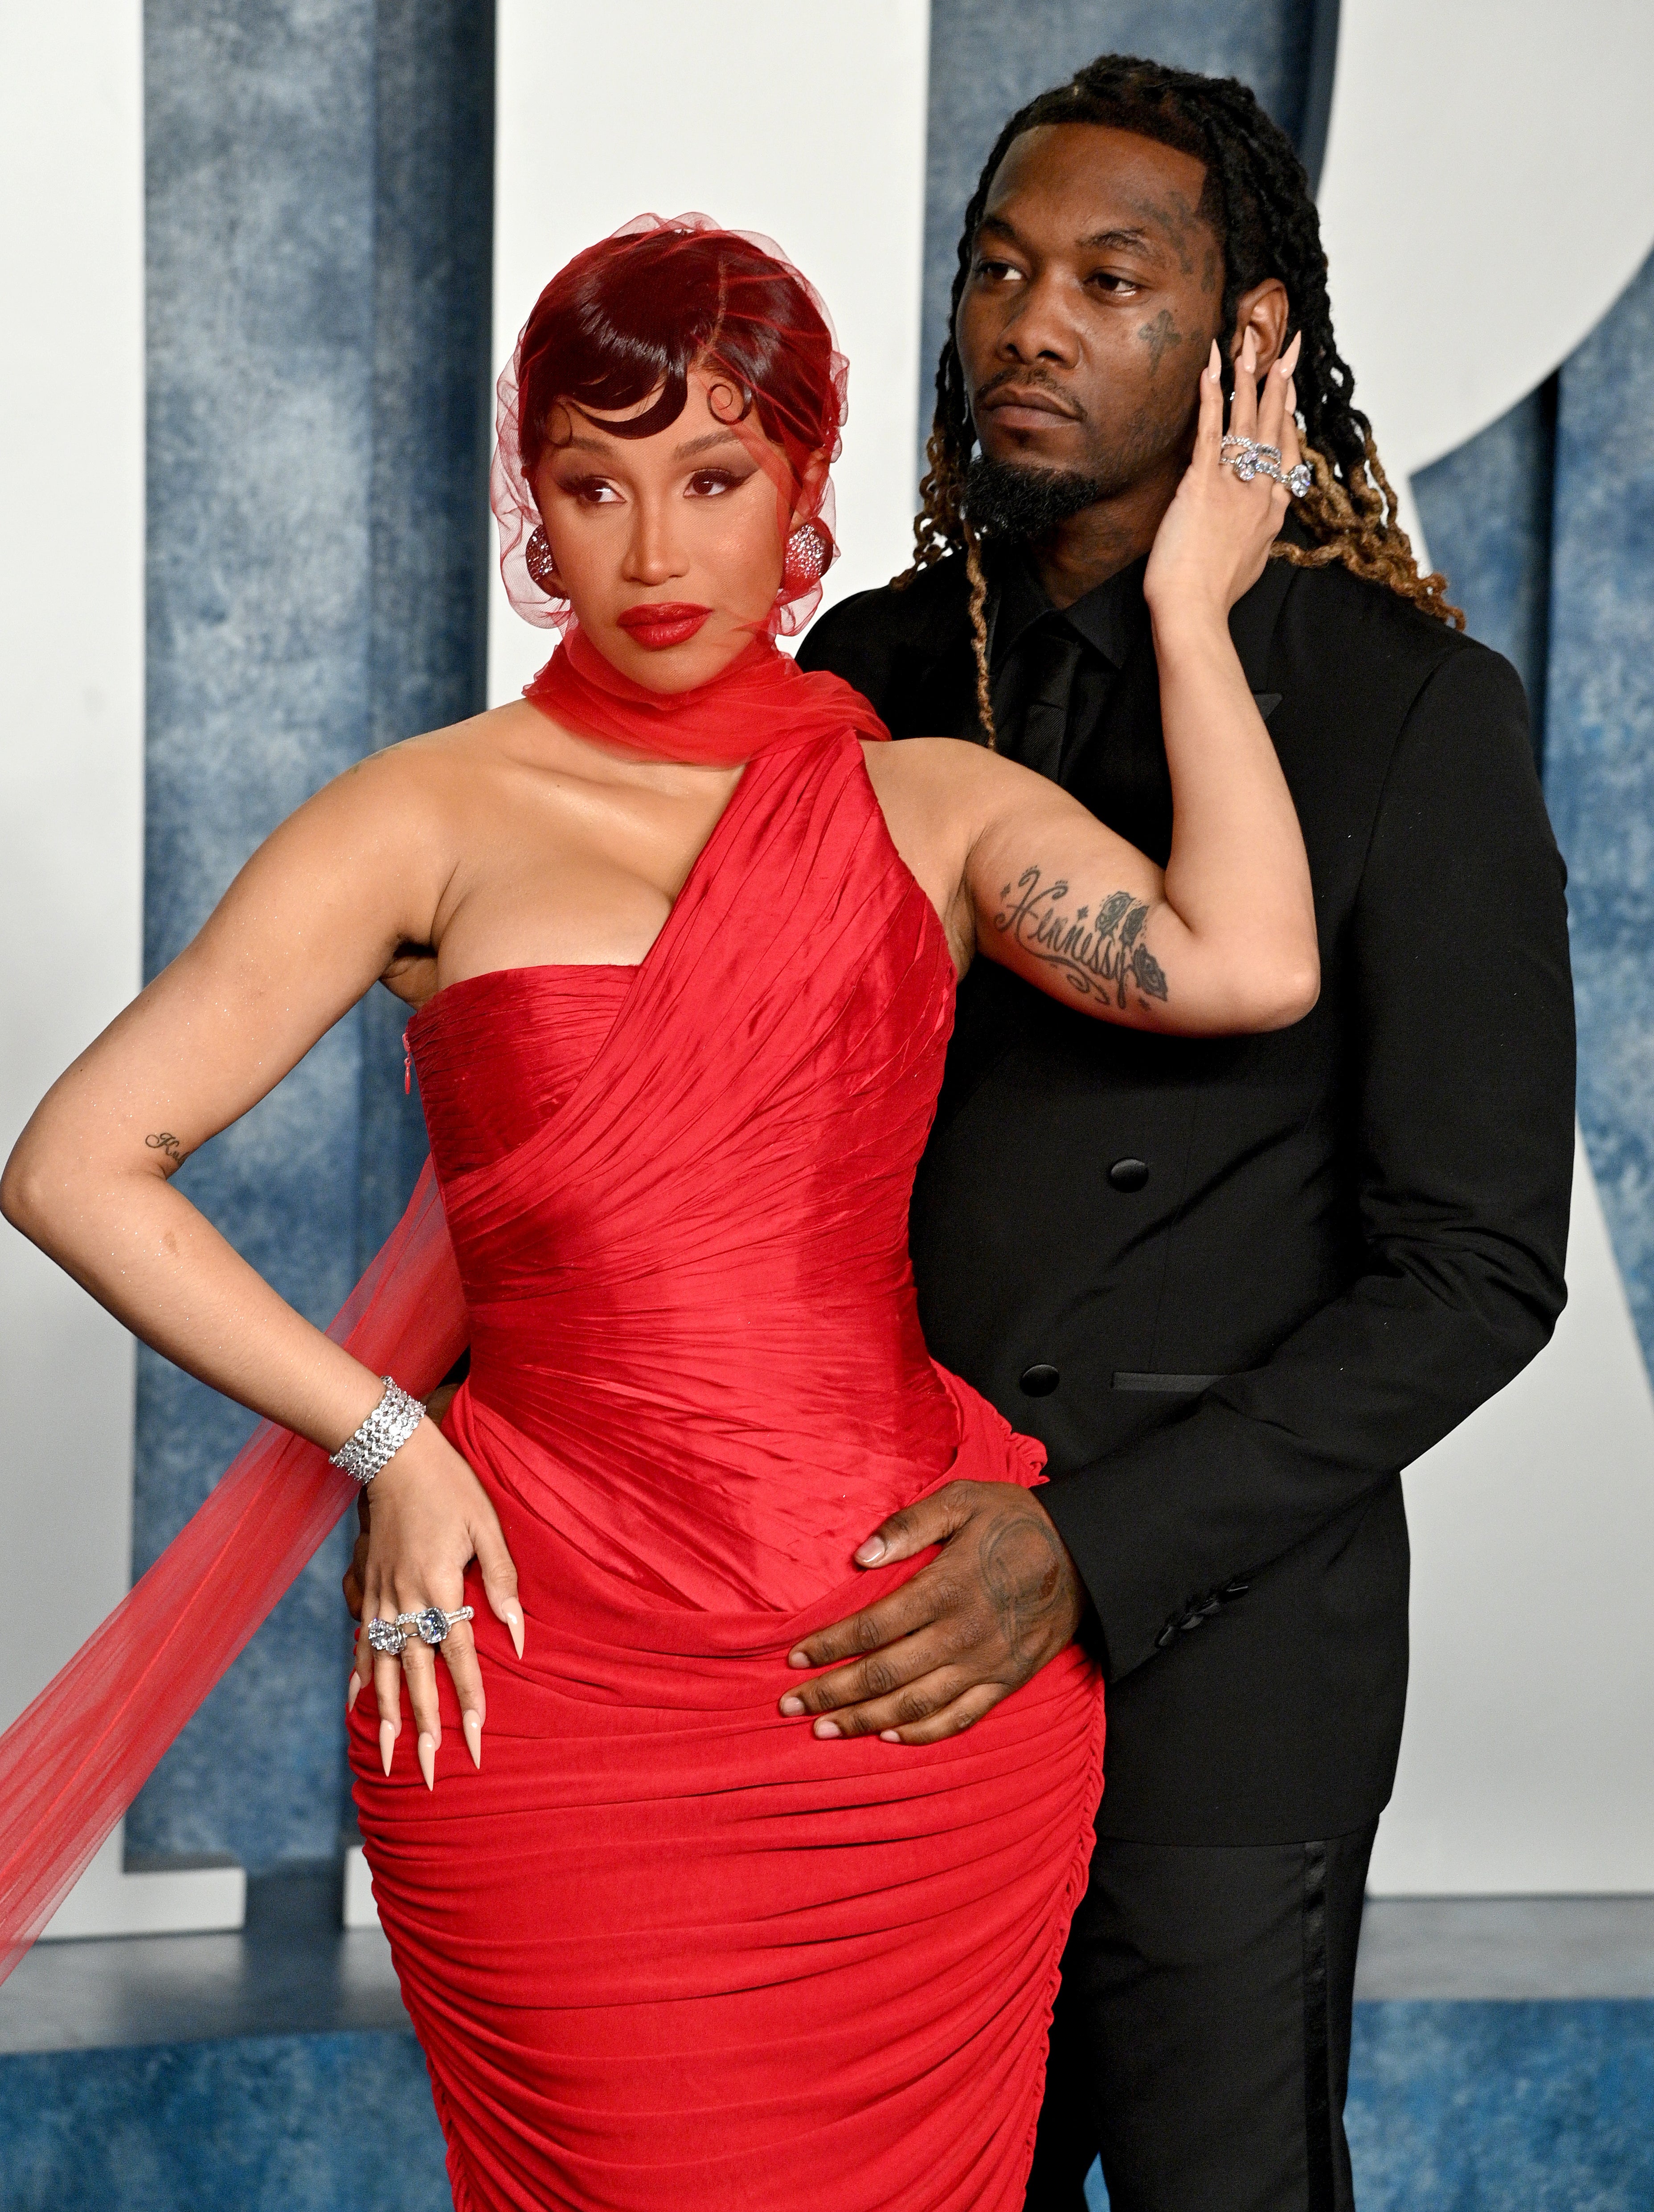 Cardi B and Offset on the red carpet